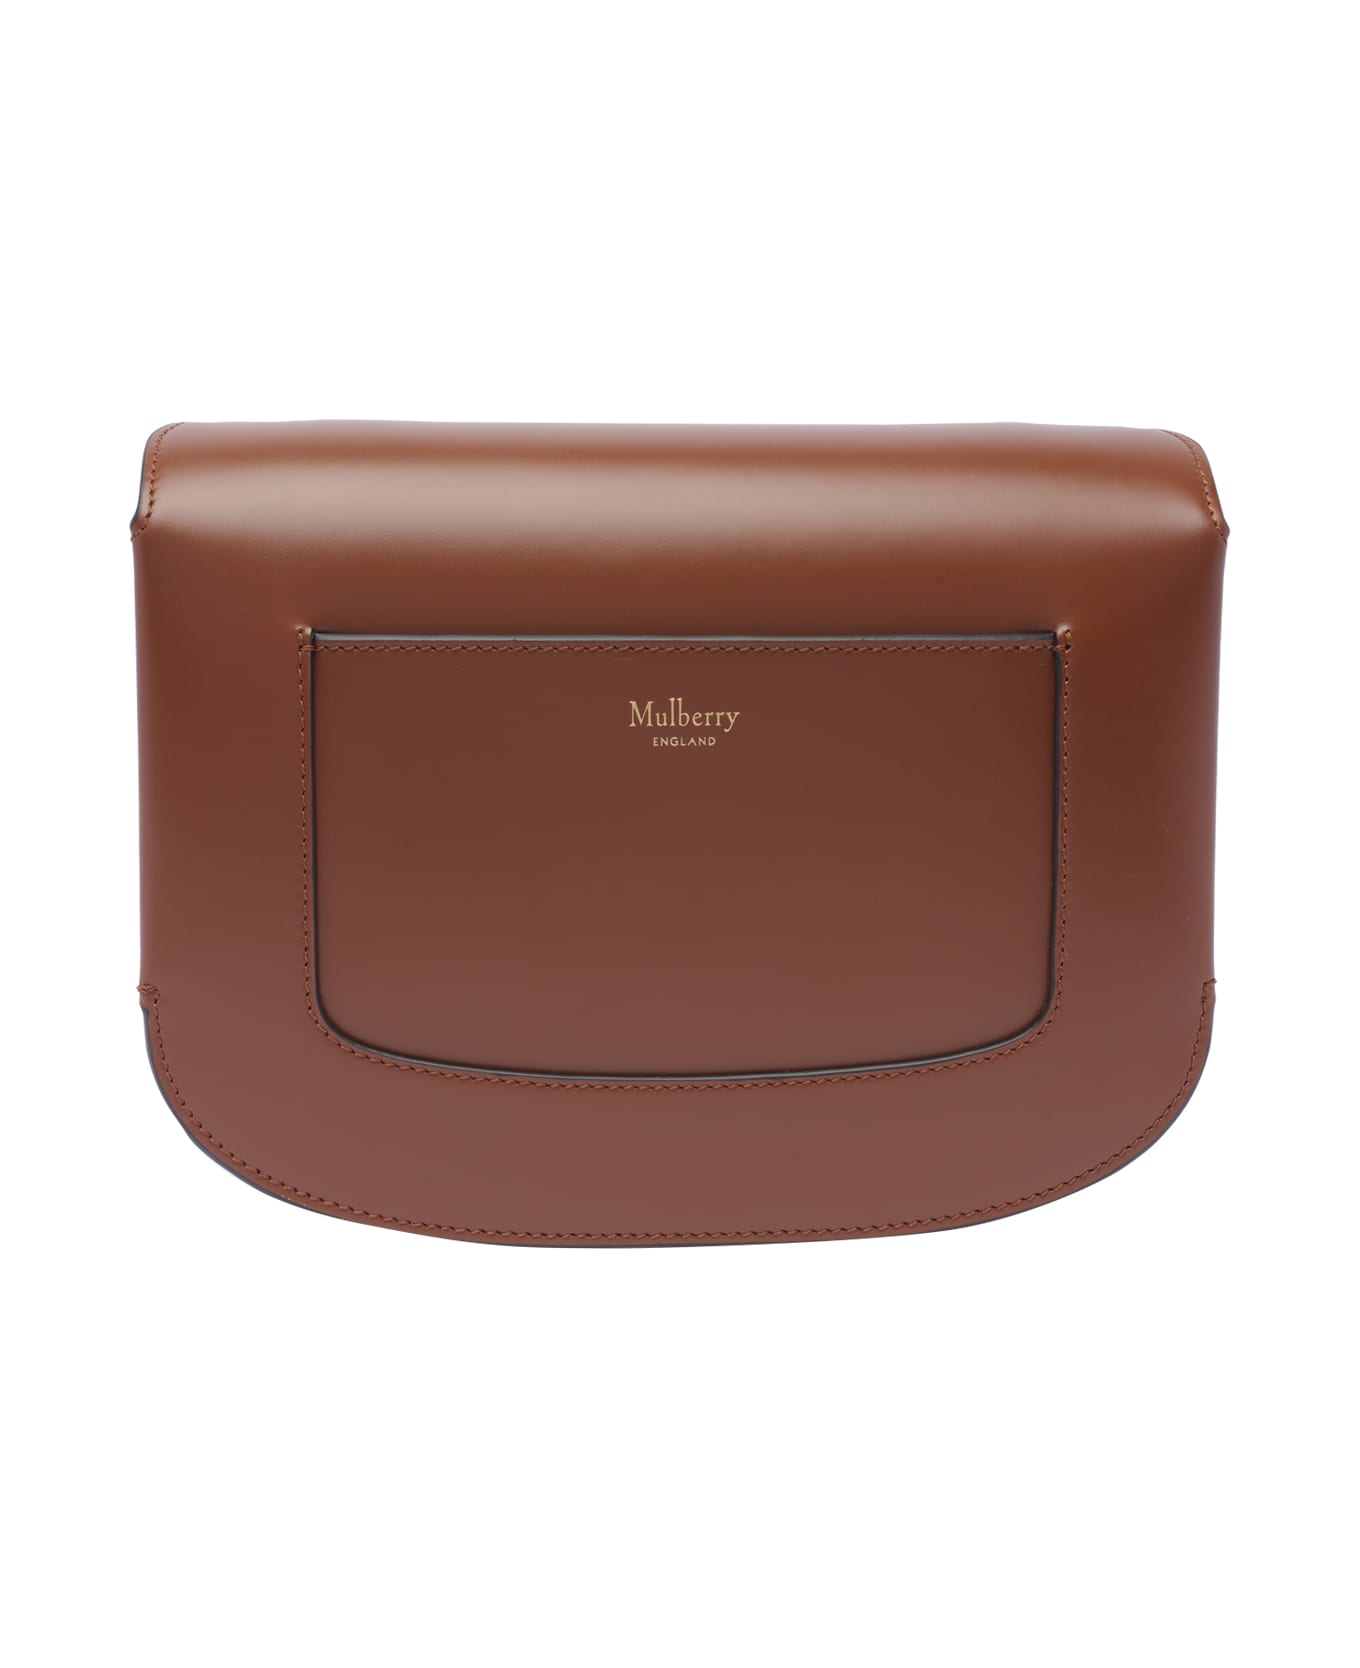 Mulberry Pimlico Crossbody Bag - Brown トートバッグ